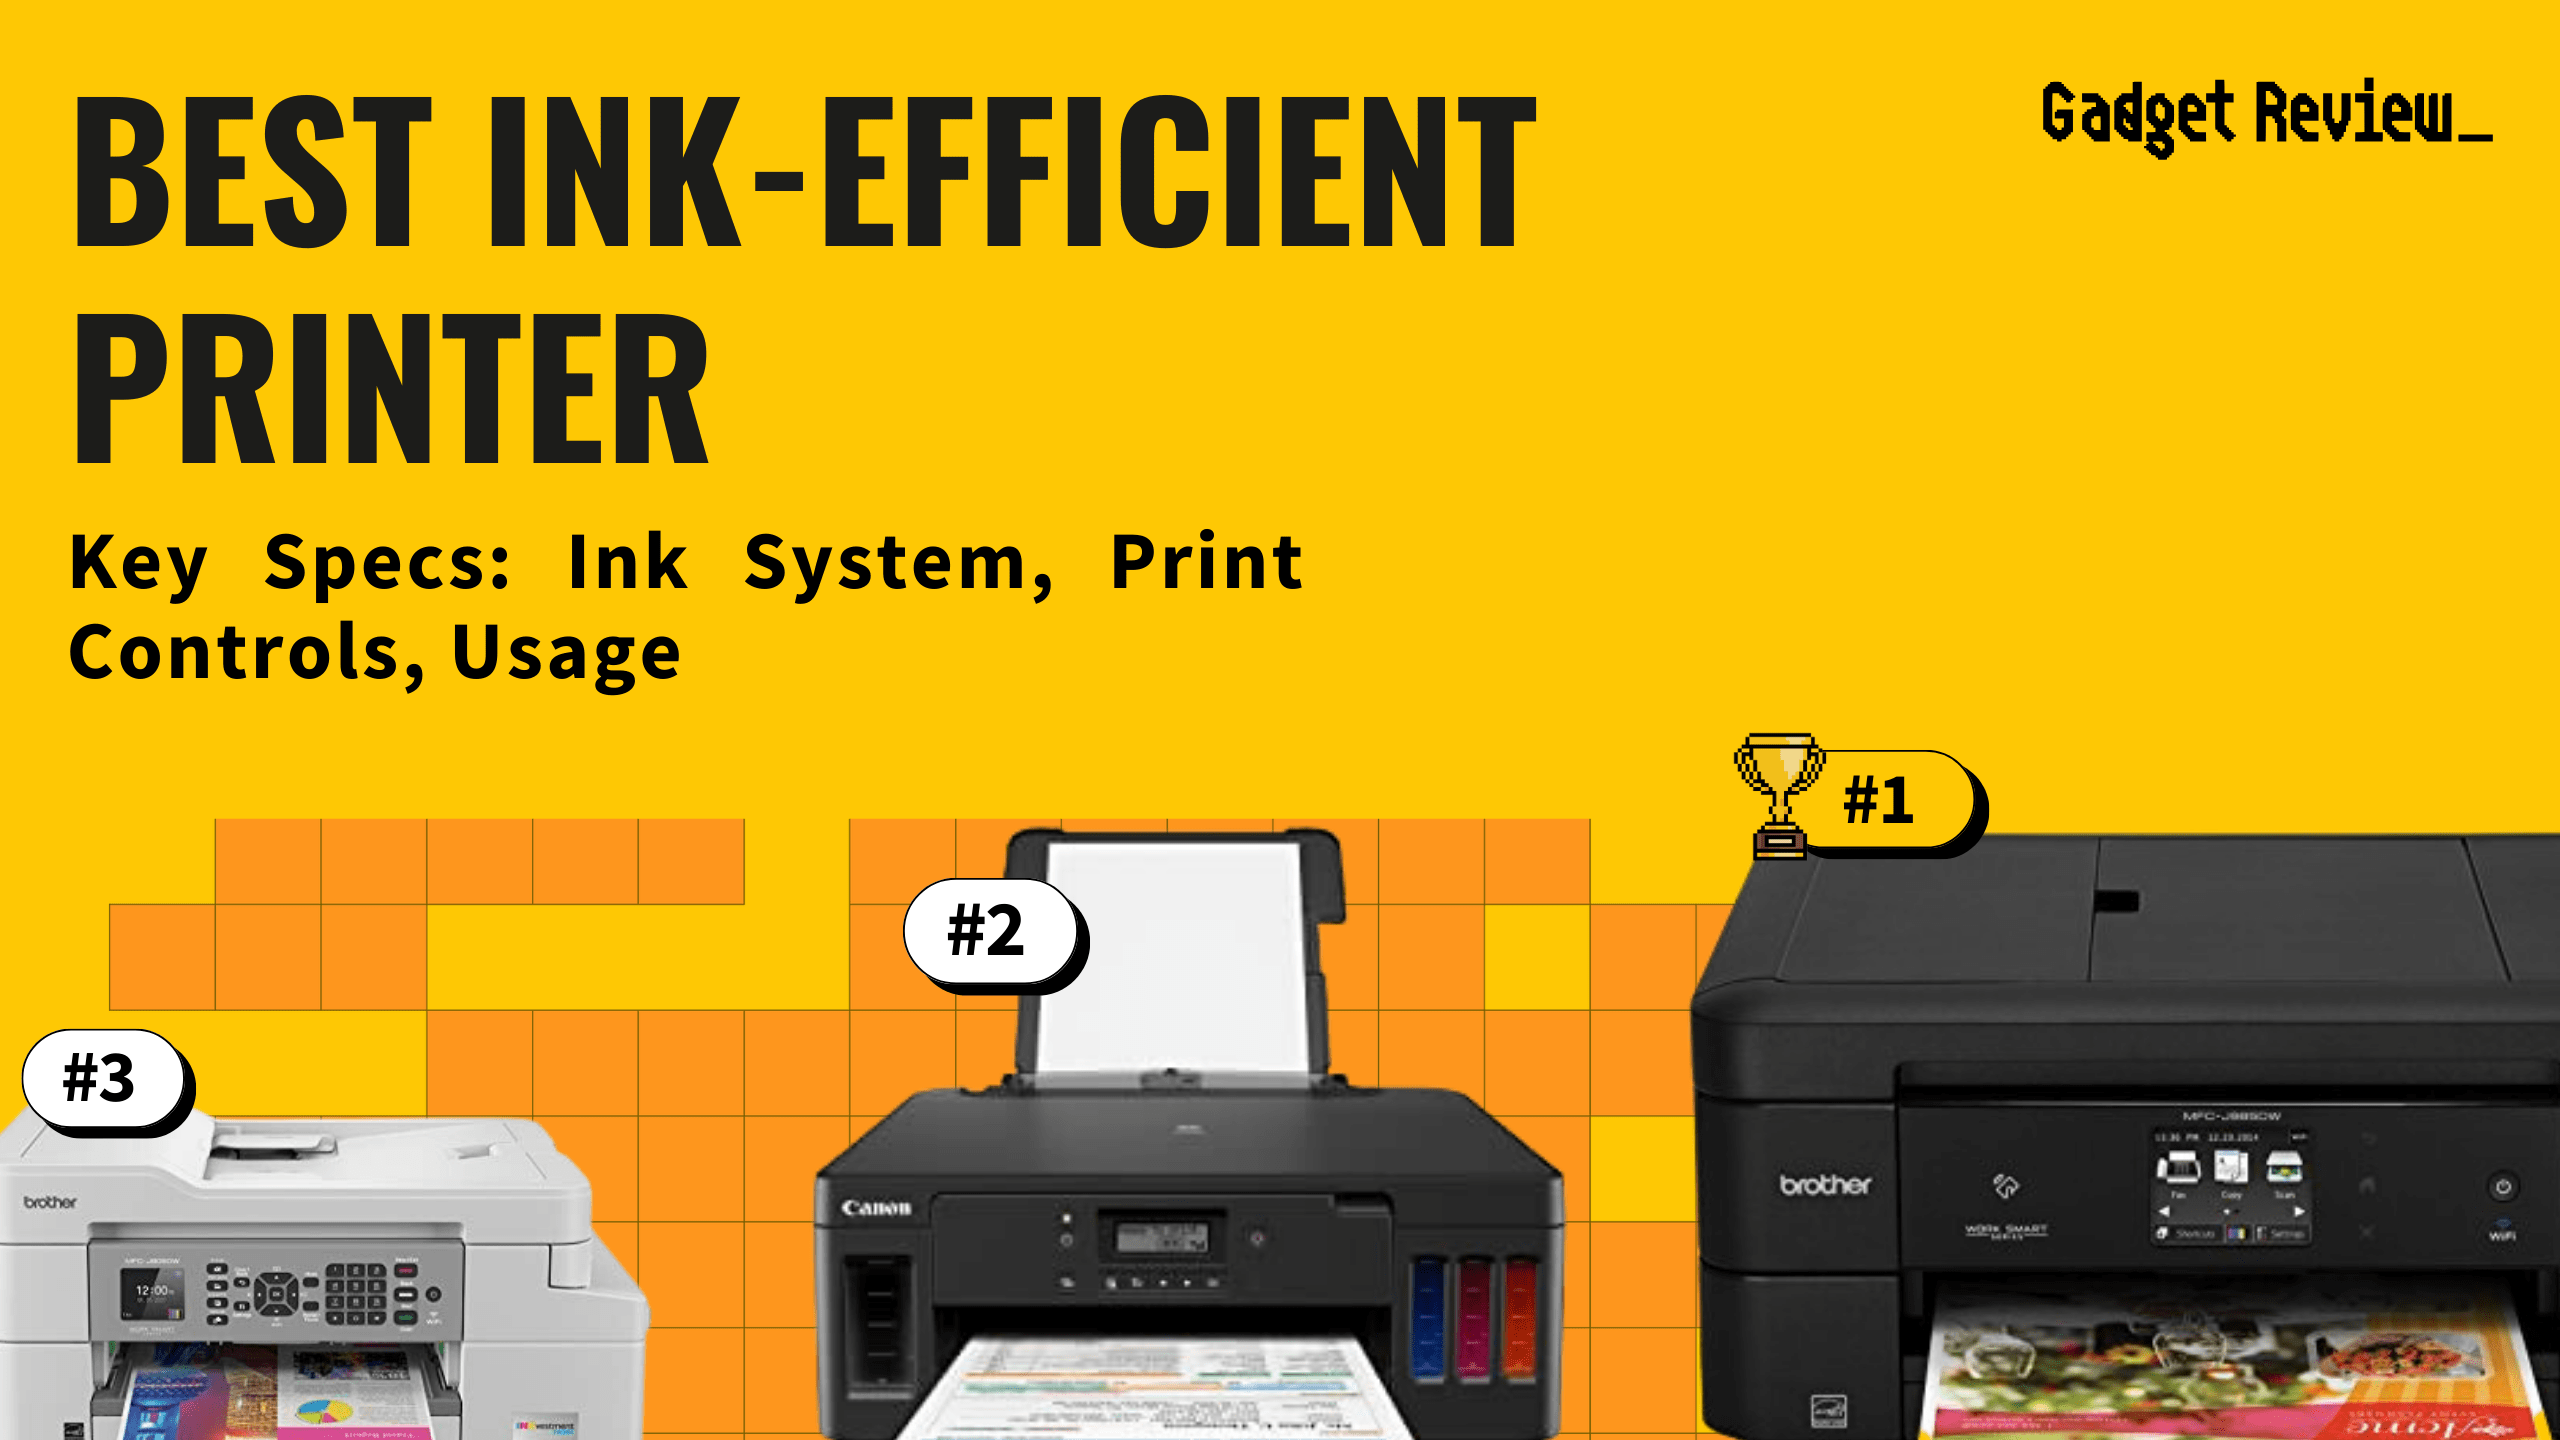 best ink efficient printer featured image that shows the top three best printer models